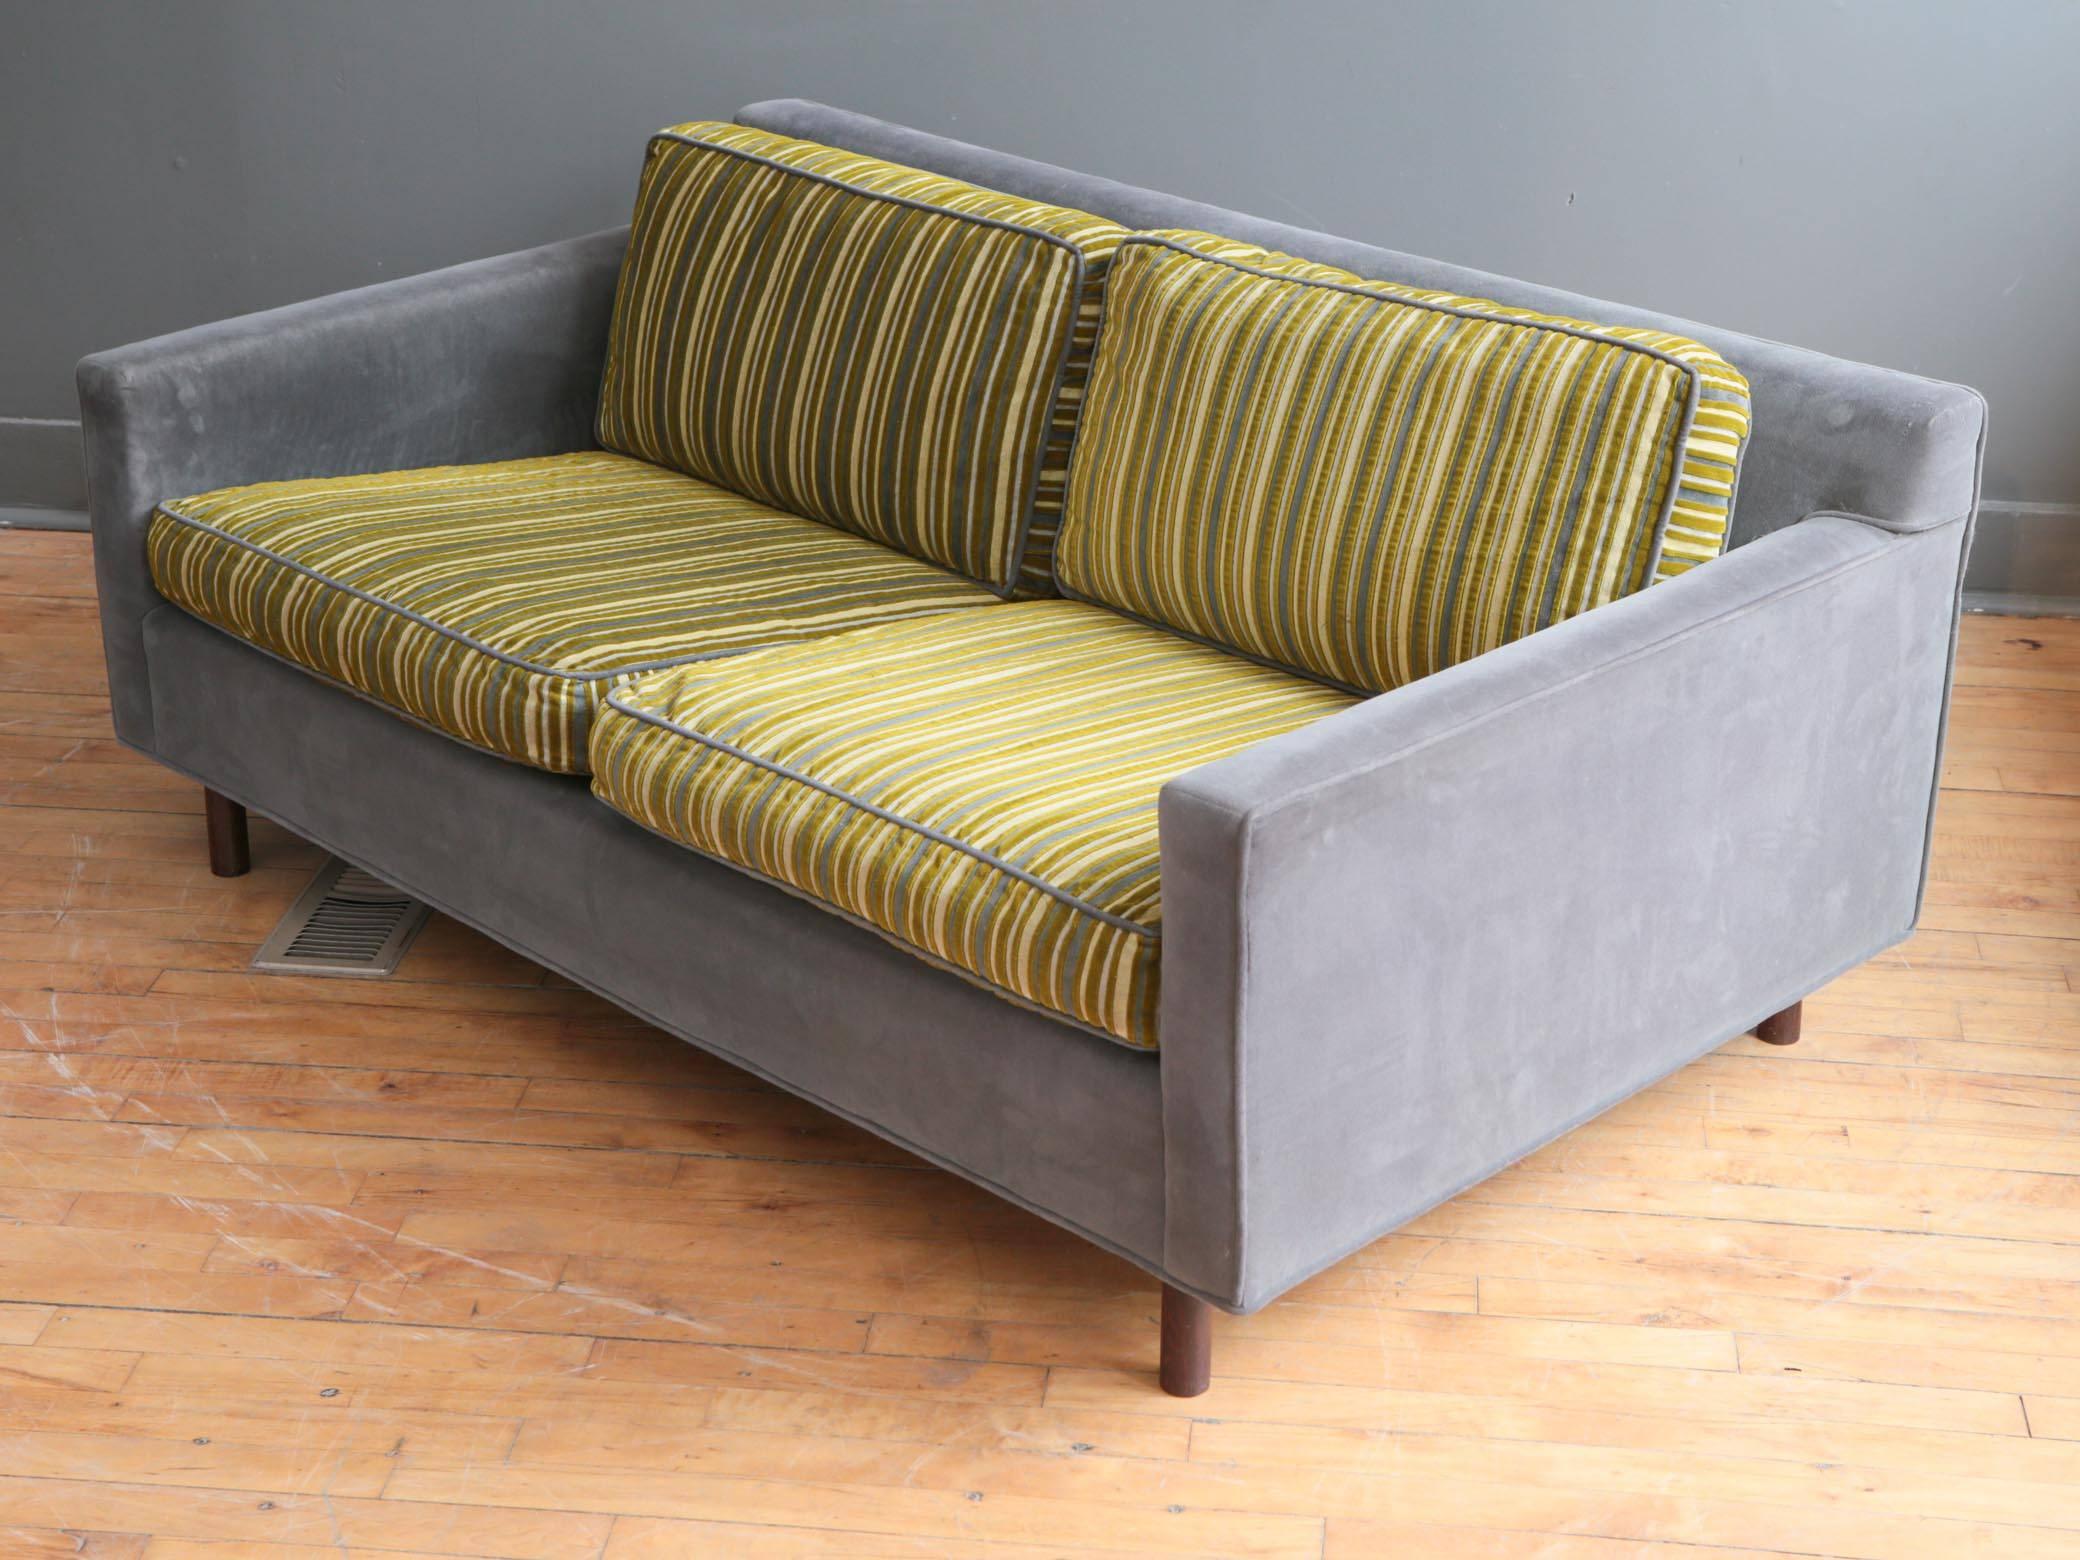 A nicely scaled Mid-Century Modern loveseat very much in the Style of American designer Harvey Probber, circa 1960s. Featuring a classic form with two loose seat cushions and two loose back cushions. Supported by cylindrical rosewood legs.